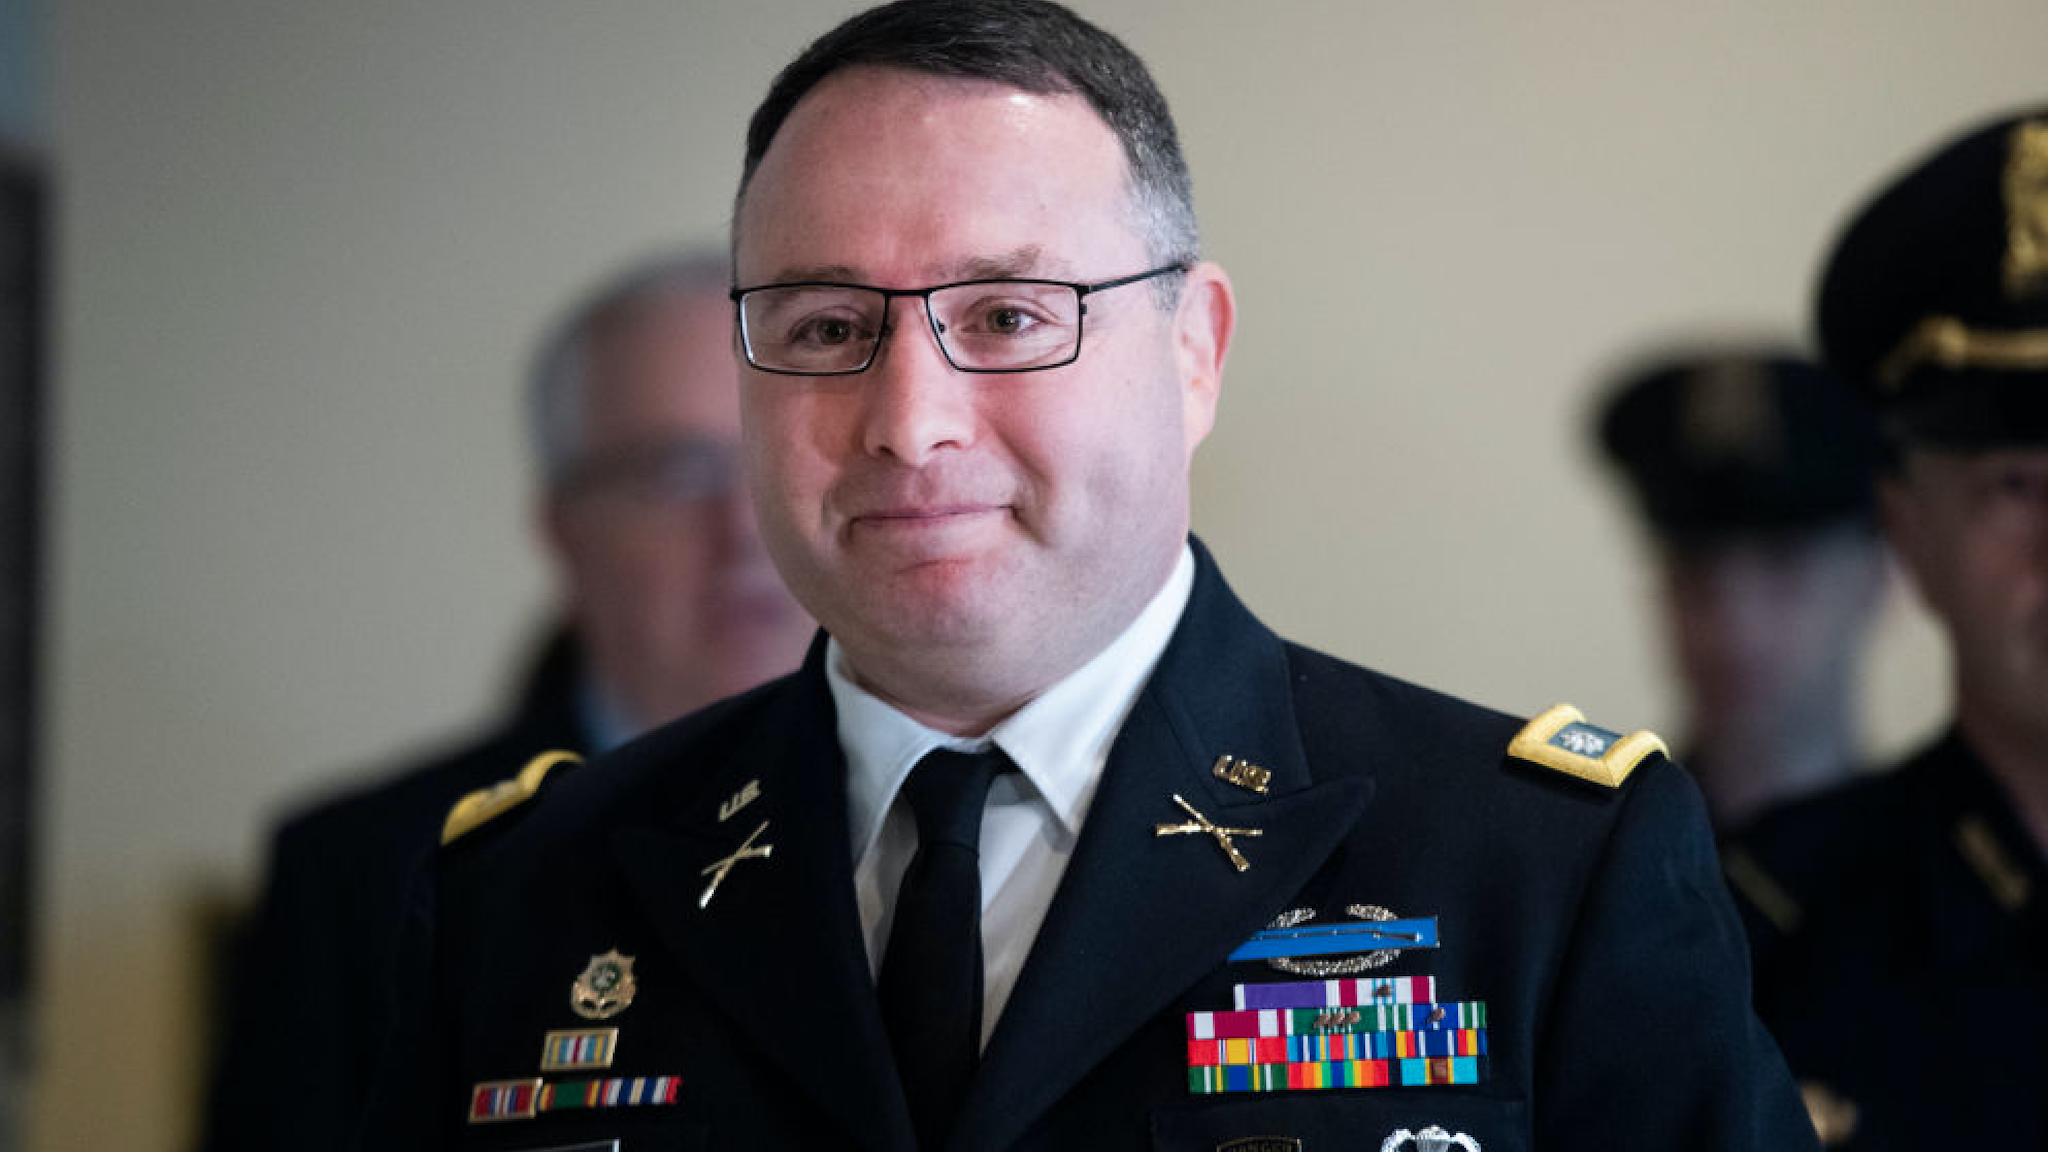 Lt. Col. Alexander Vindman, director of European affairs at the National Security Council, arrives in the Capitol Visitor Center for his deposition related to the House's impeachment inquiry on Tuesday, October 29, 2019.